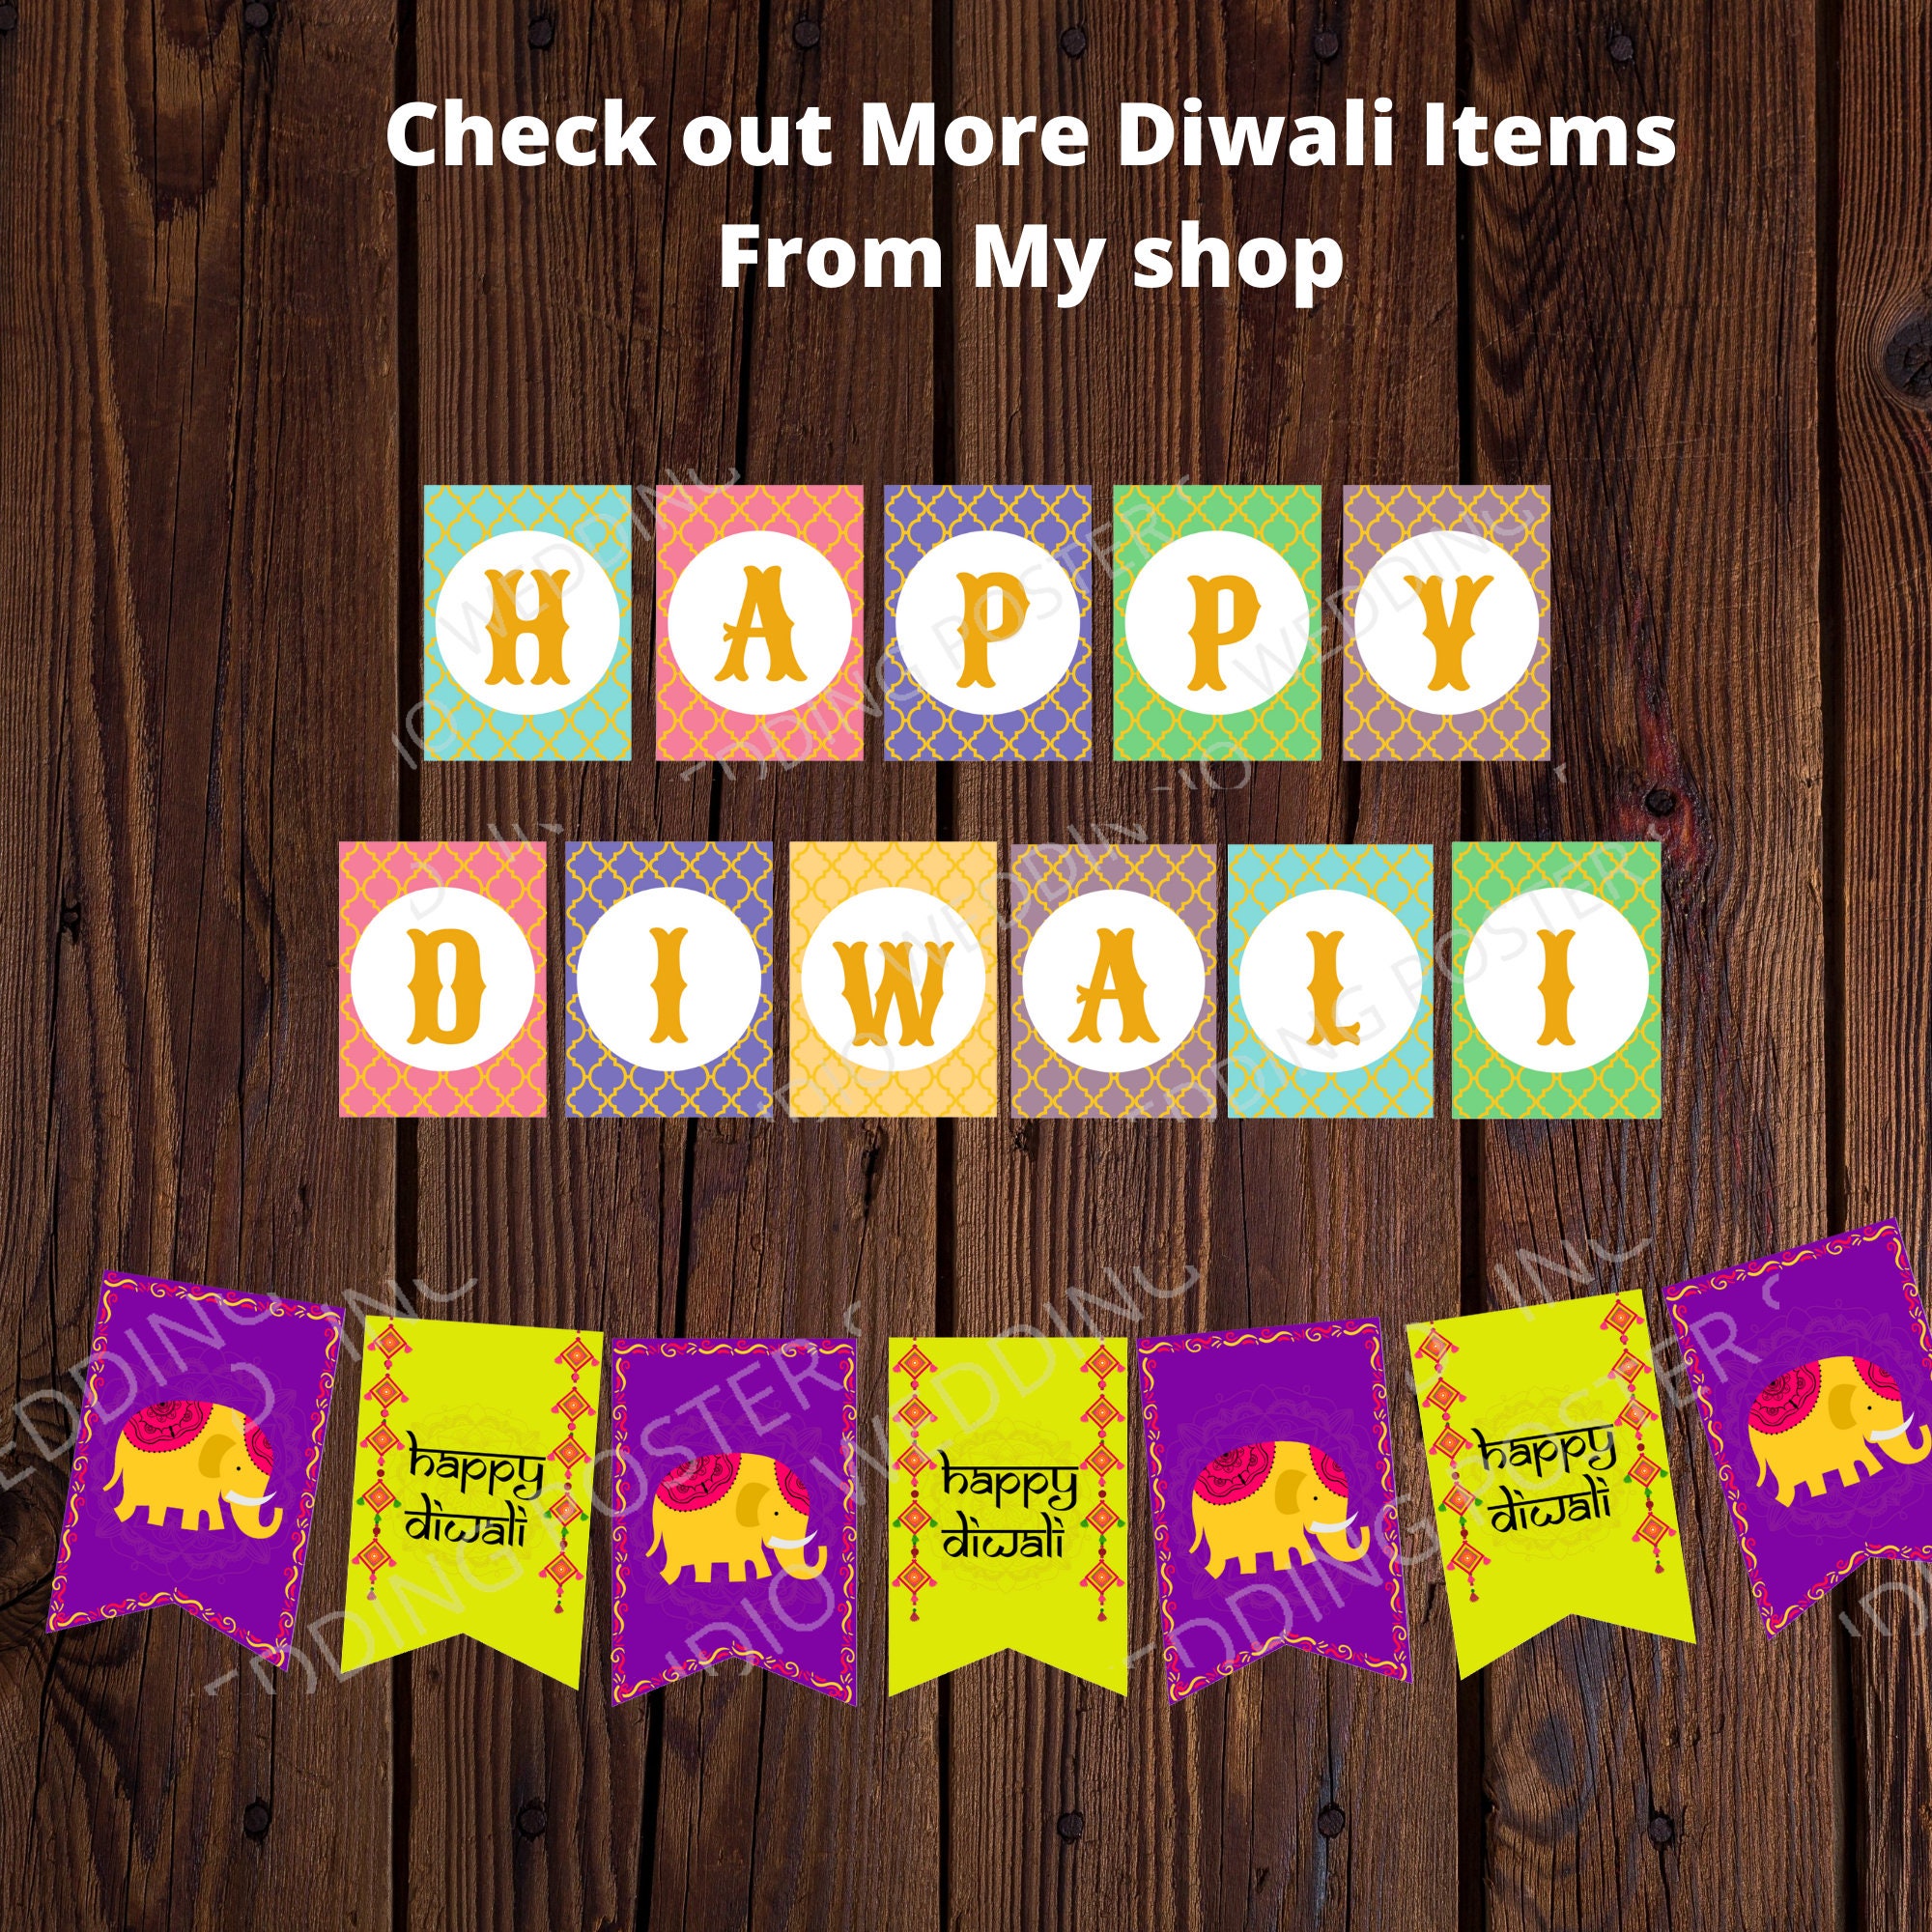 DIY Diwali Photo Booth Frame Photo Booth Props Festival - Etsy